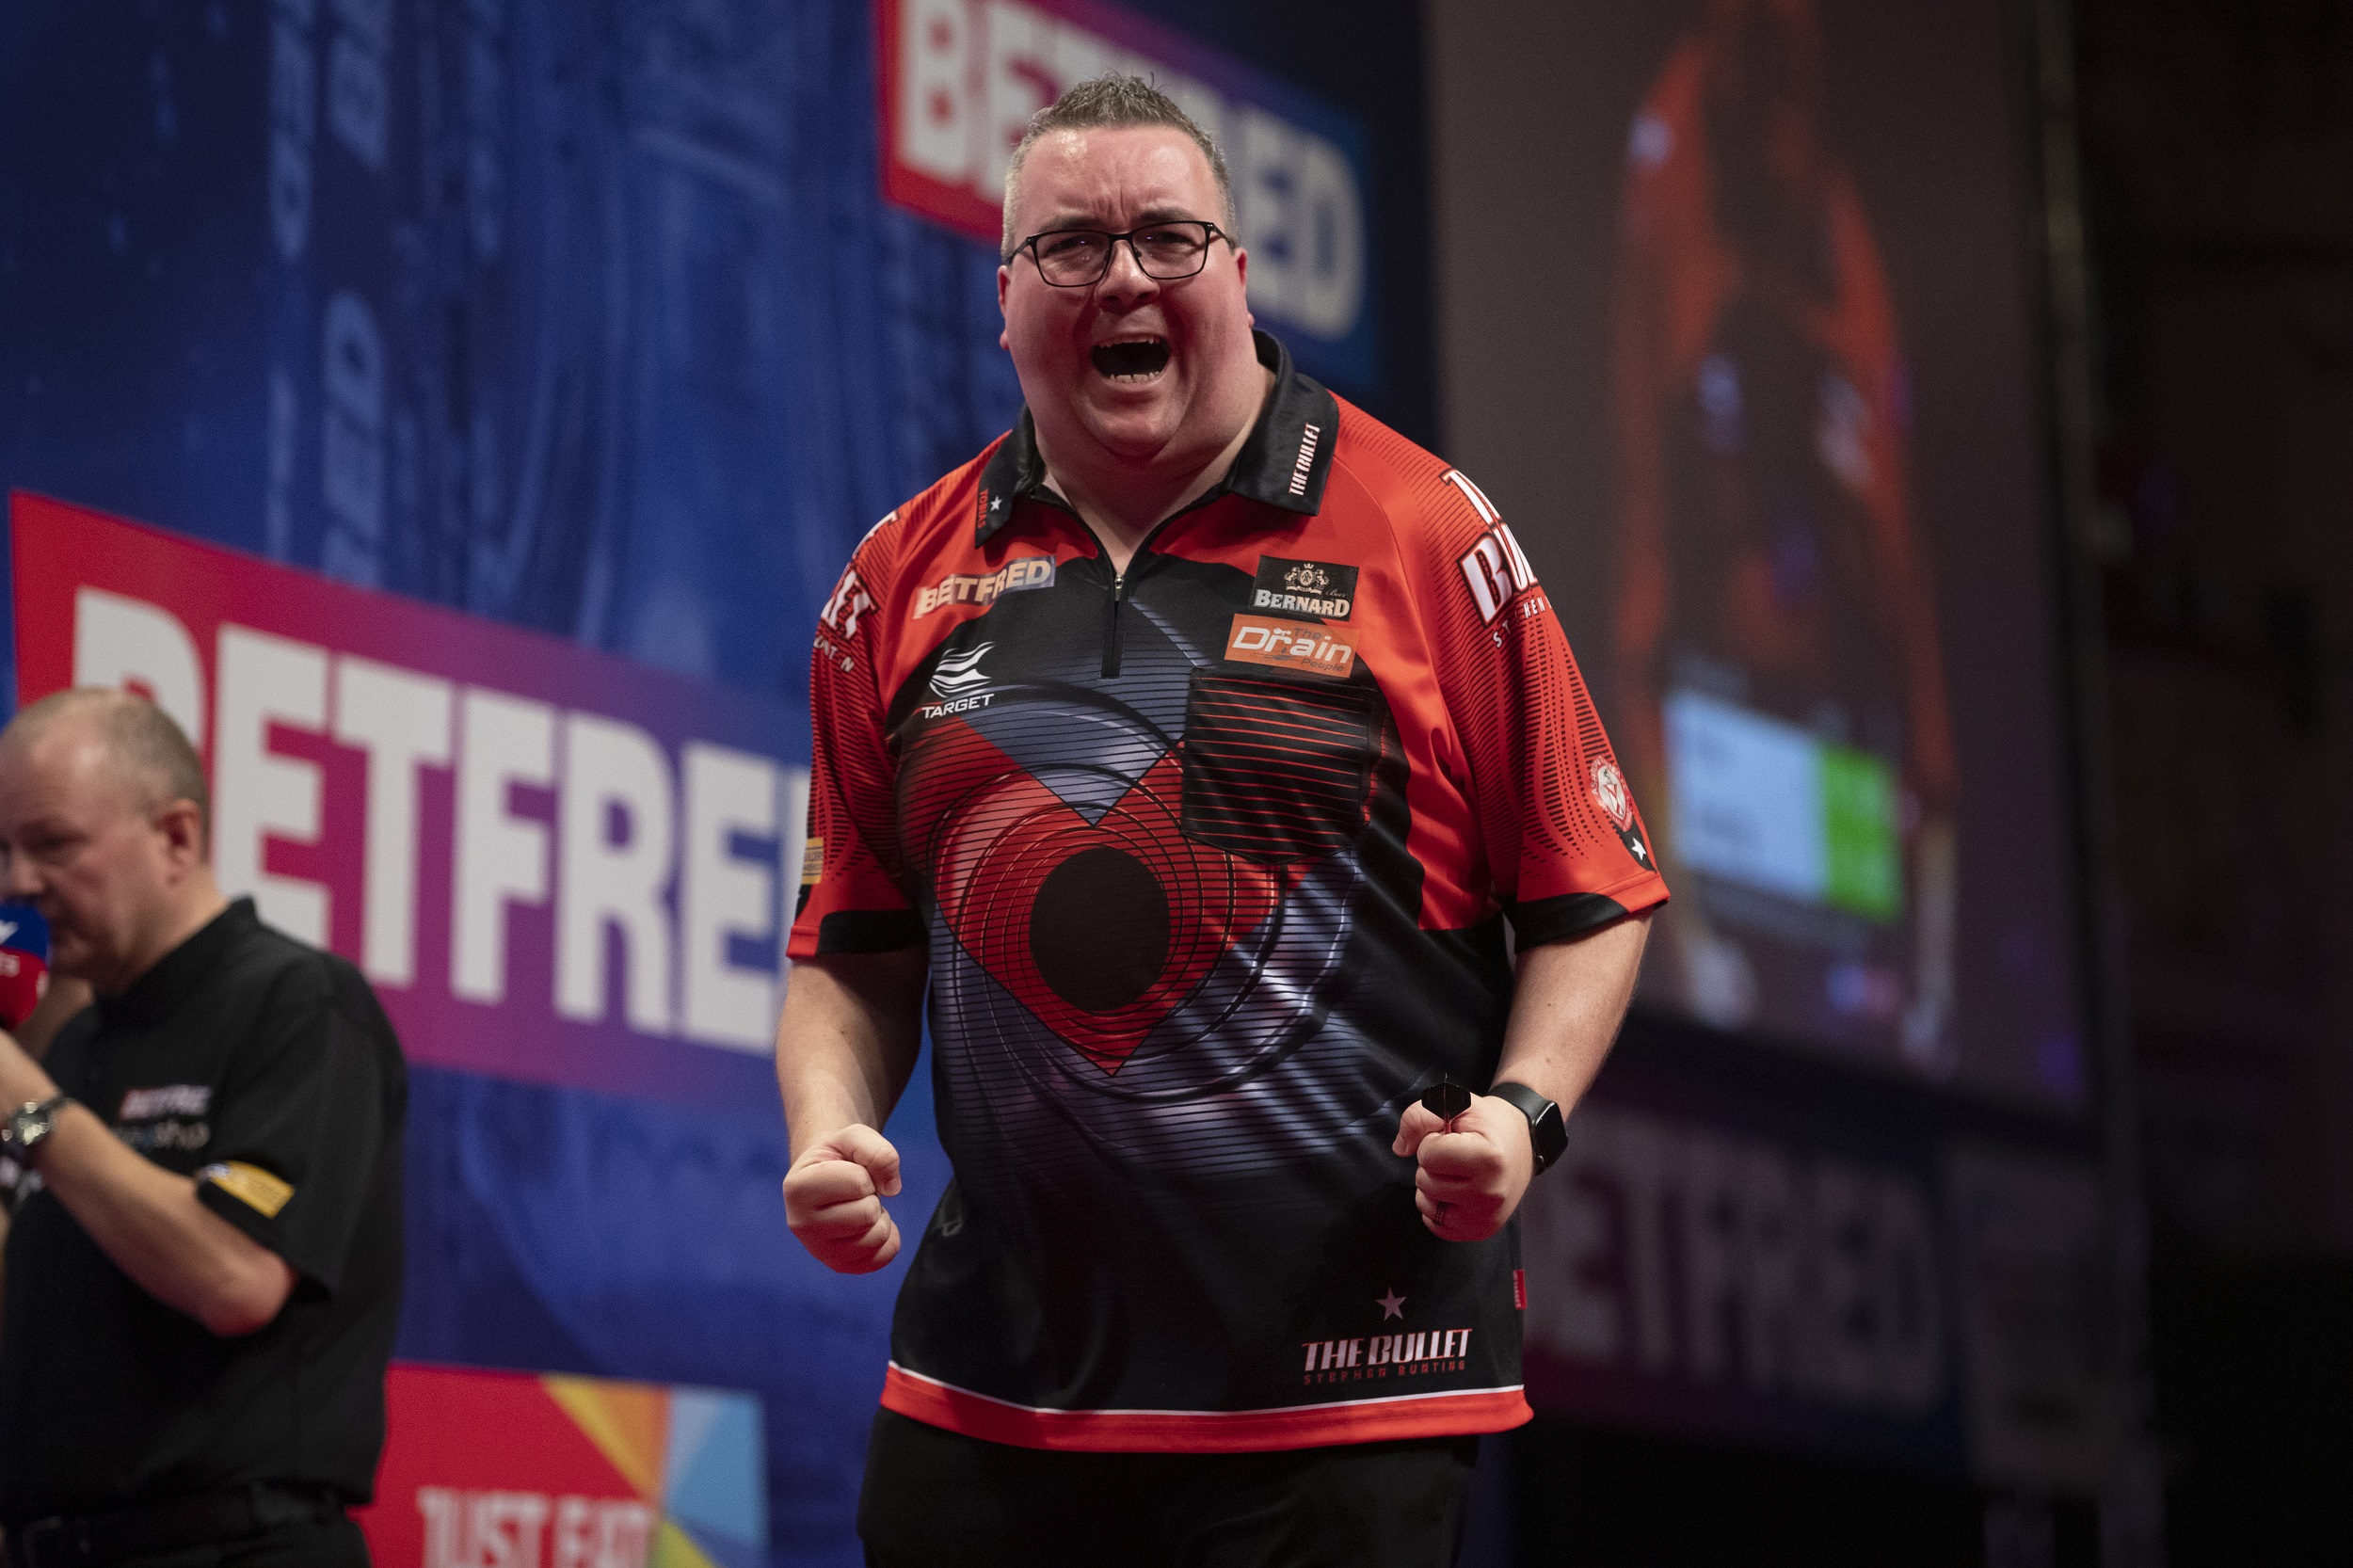 Stephen Bunting Wins Cazoo Masters To Claim Maiden TV Title